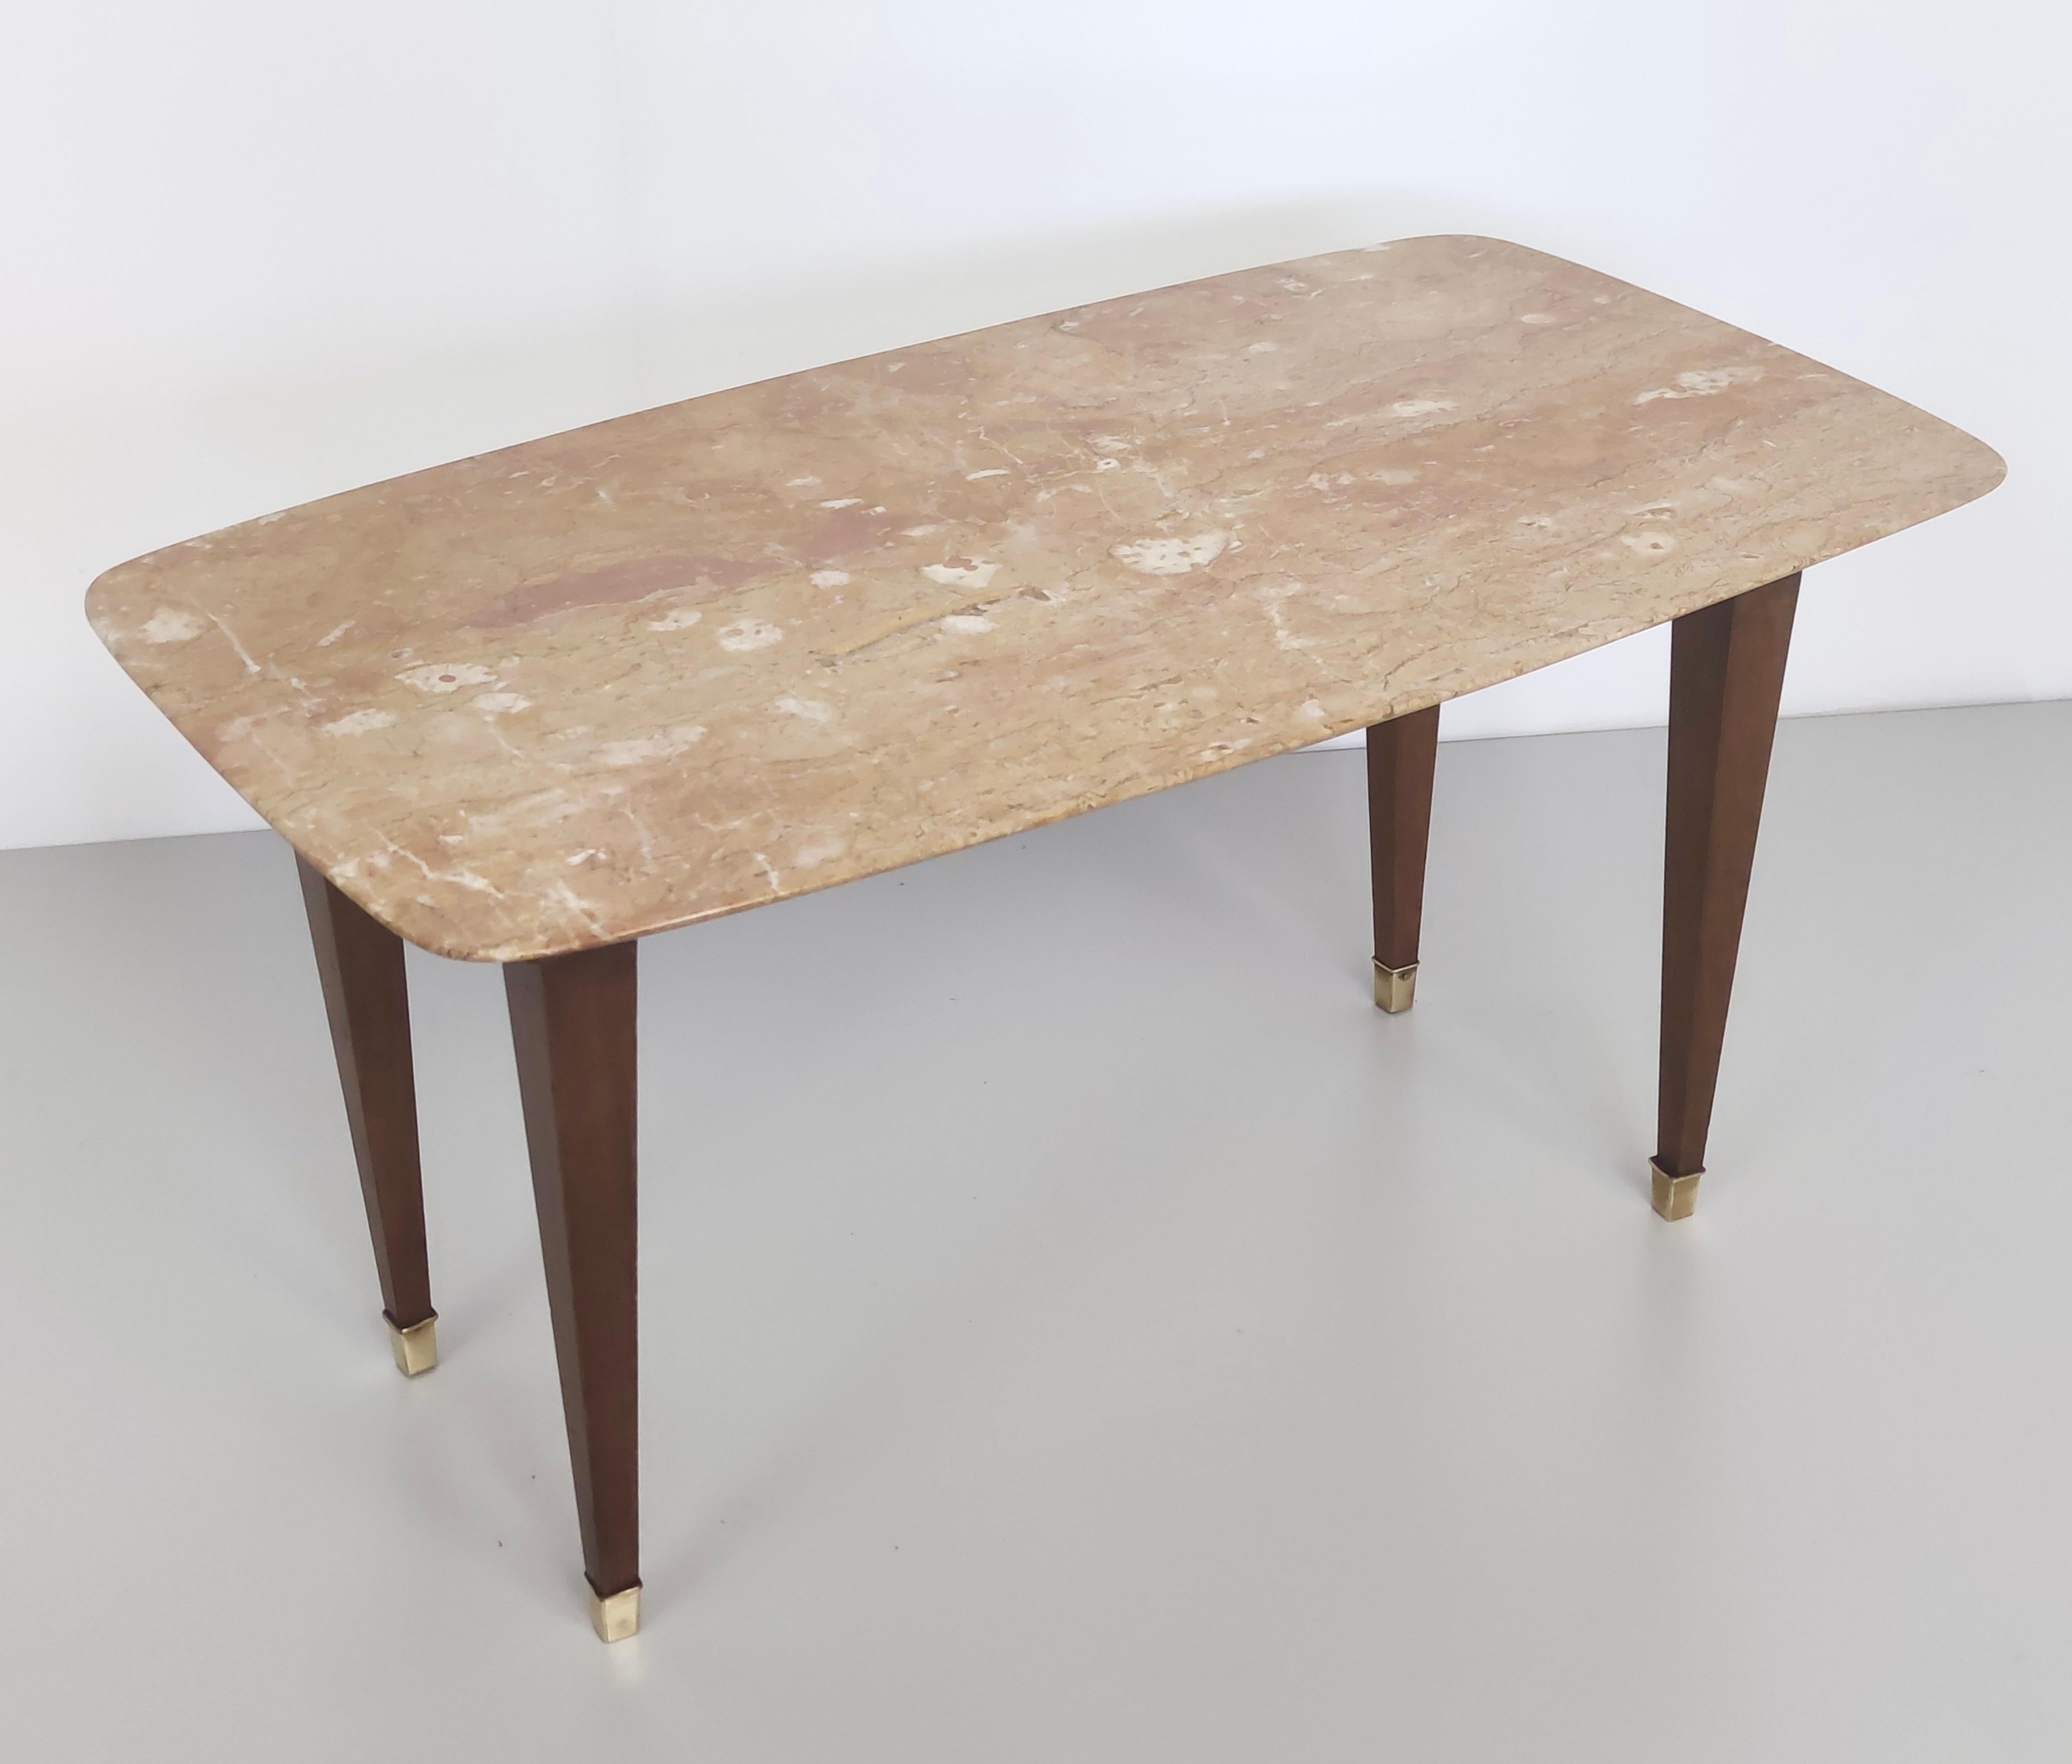 Vintage Beech Coffee Table by Paolo Buffa with a Pink Travertine Top In Excellent Condition For Sale In Bresso, Lombardy